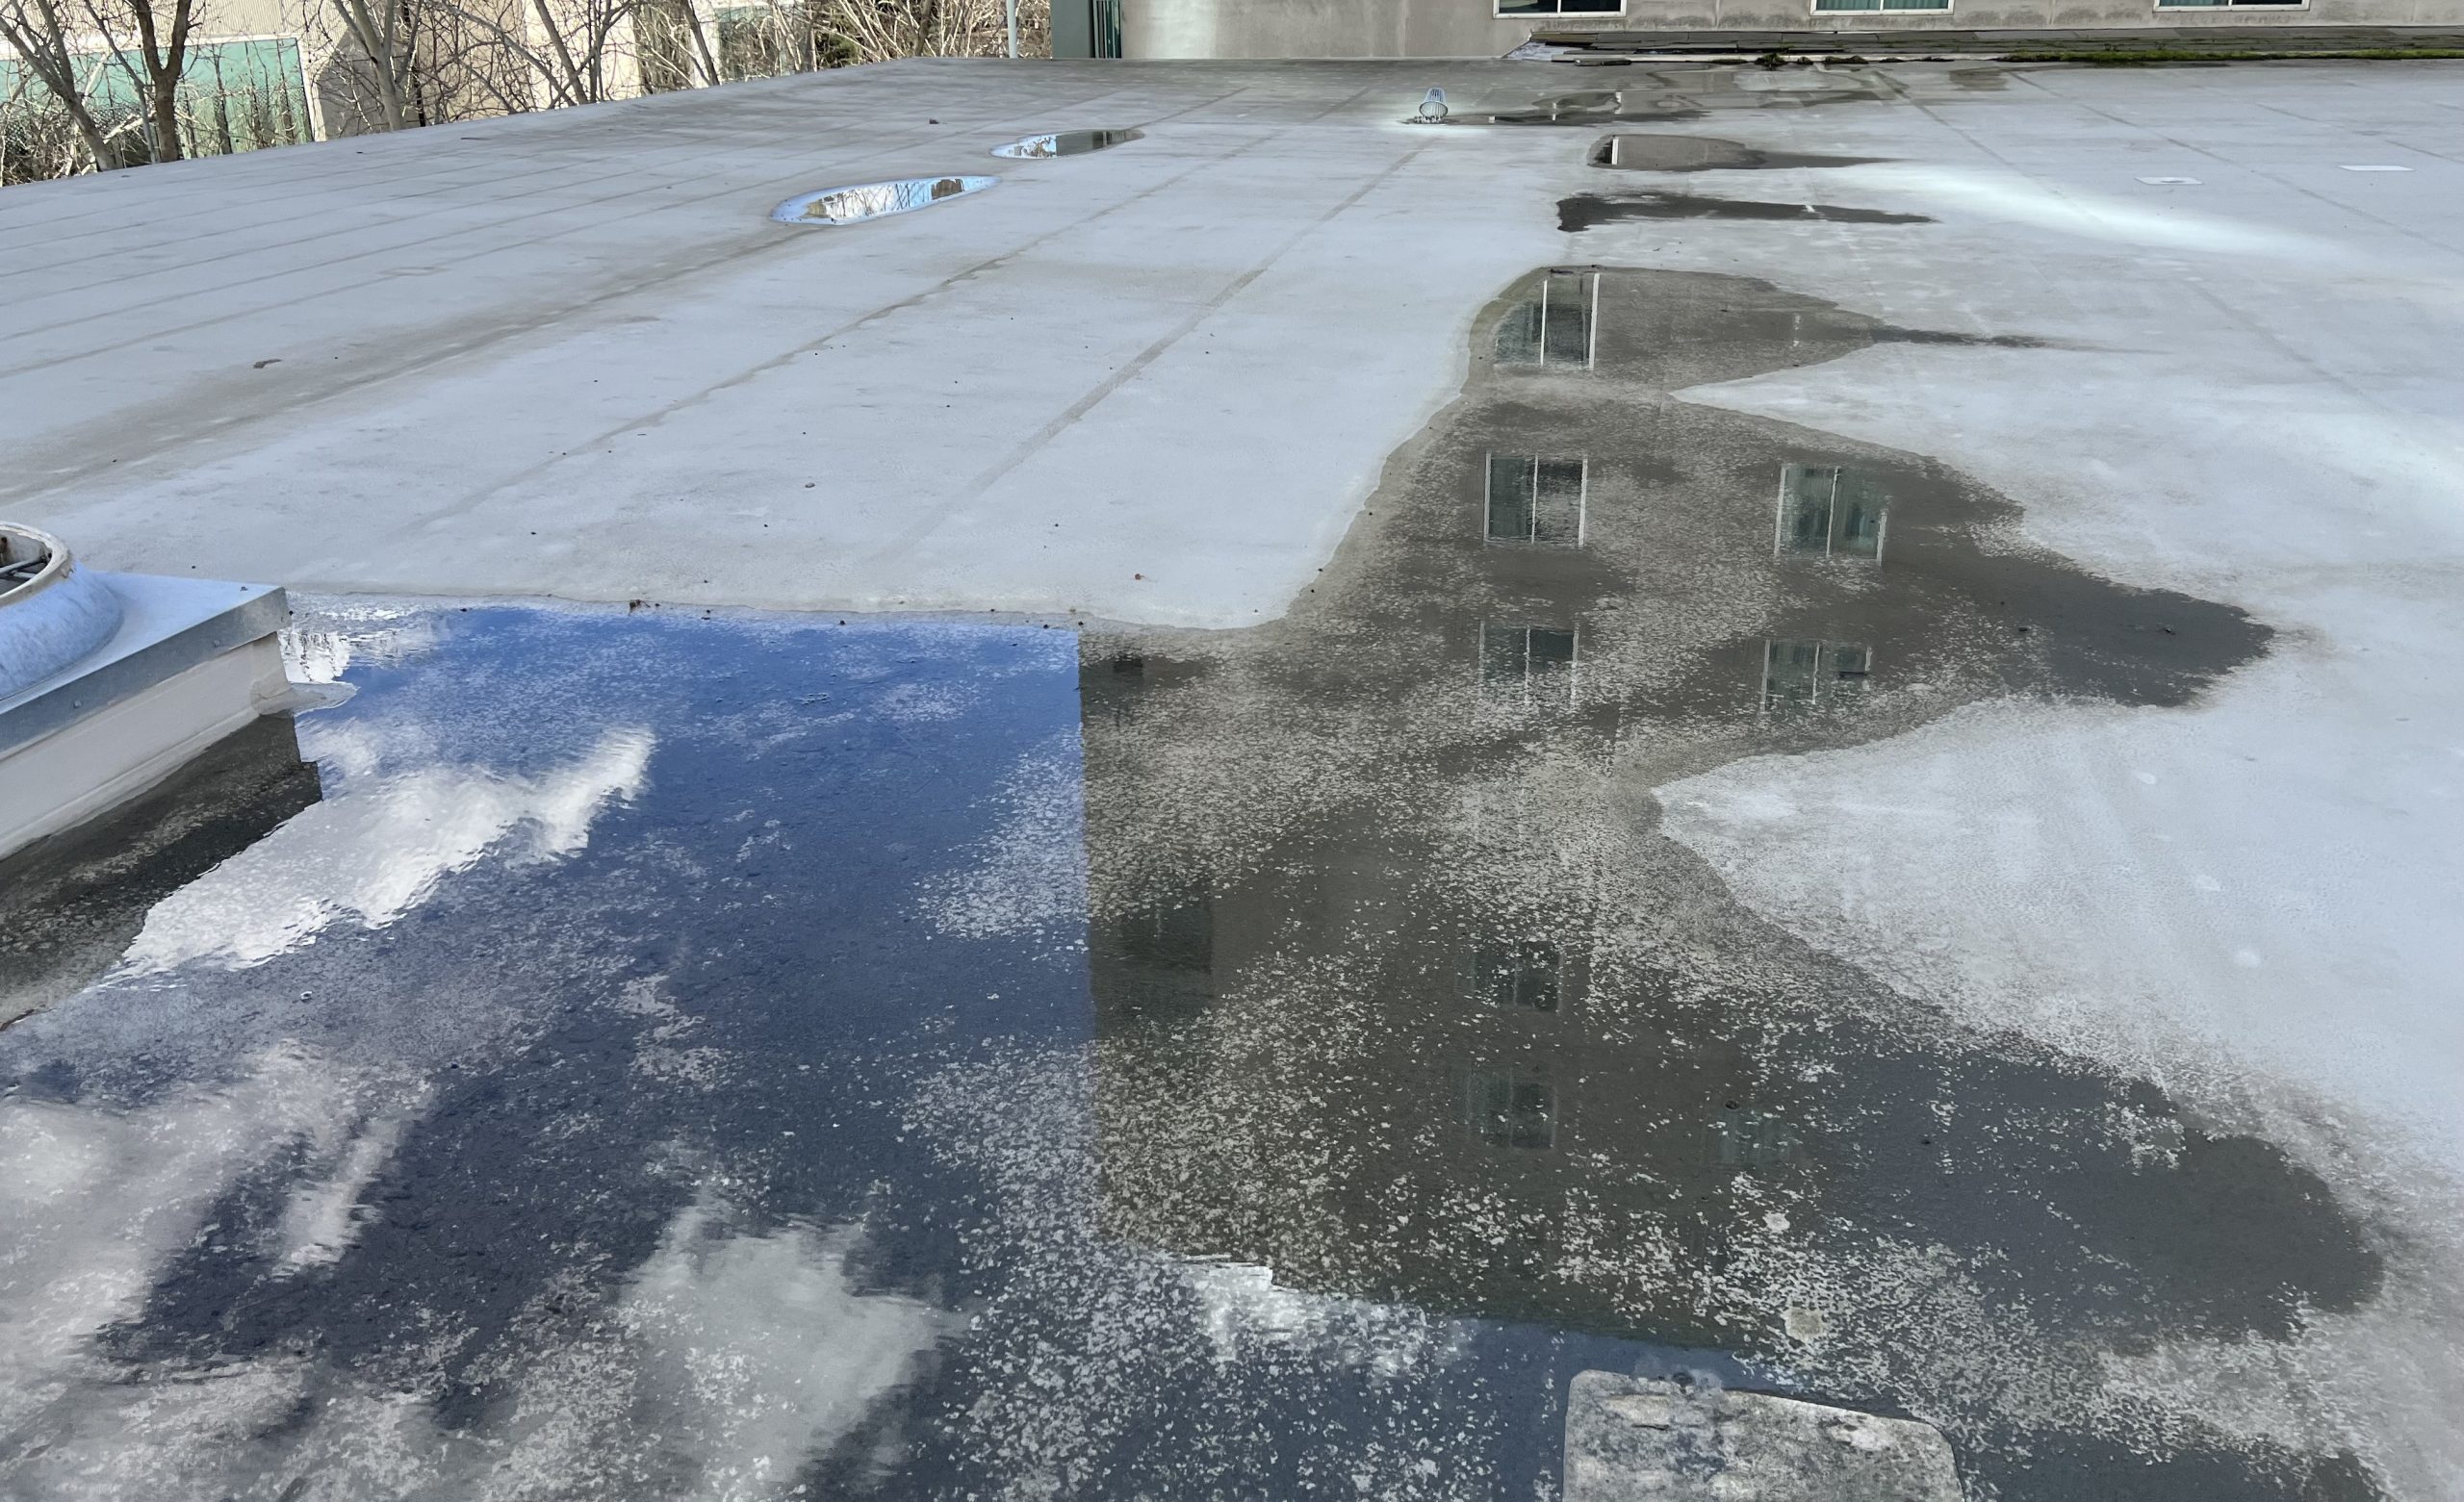 What Is Causing My Roof To Leak?